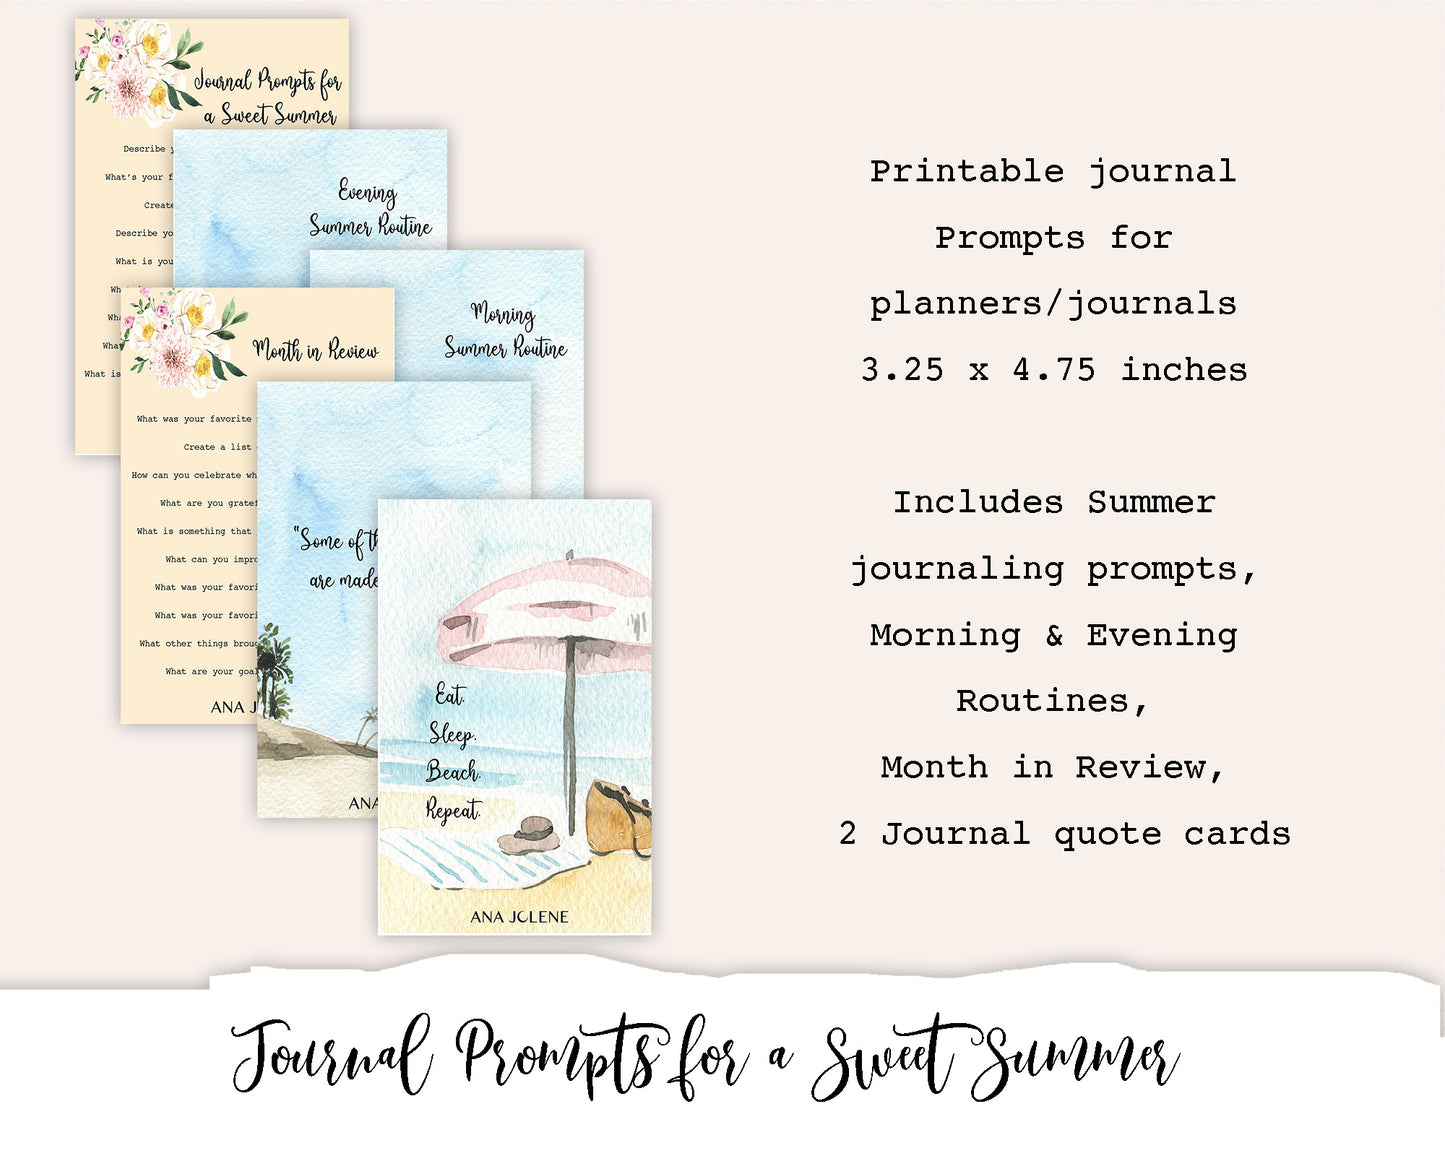 Journal Prompts for a Sweet Summer Printable